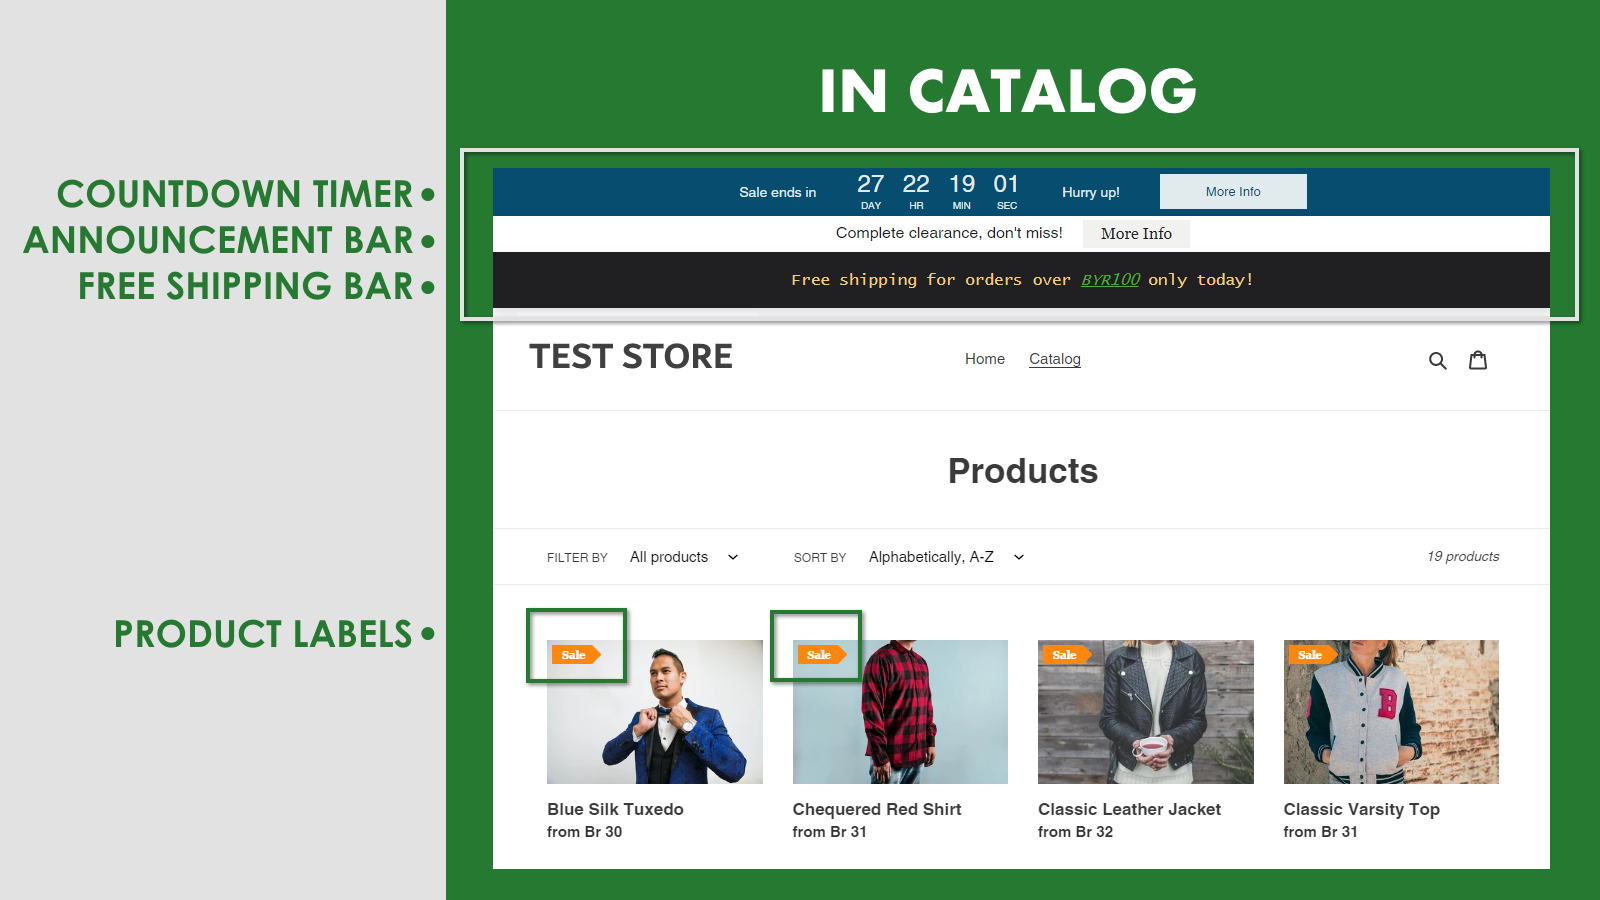 Sales Booster on Catalog Pages